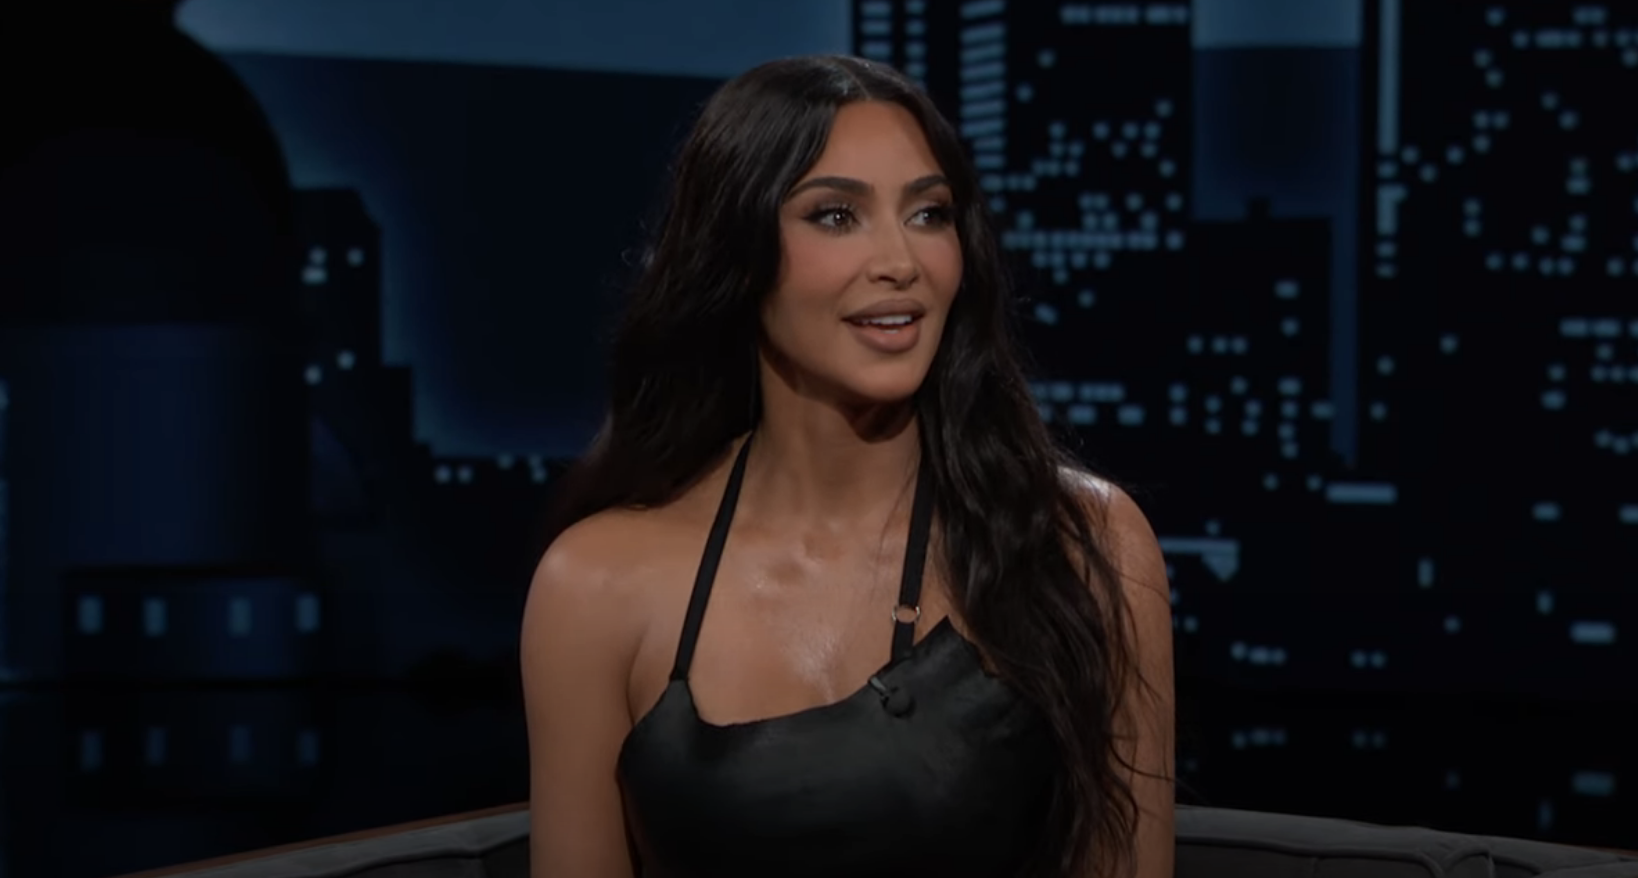 Kim Kardashian in a talk show setting, wearing a strappy top, seated with a cityscape backdrop